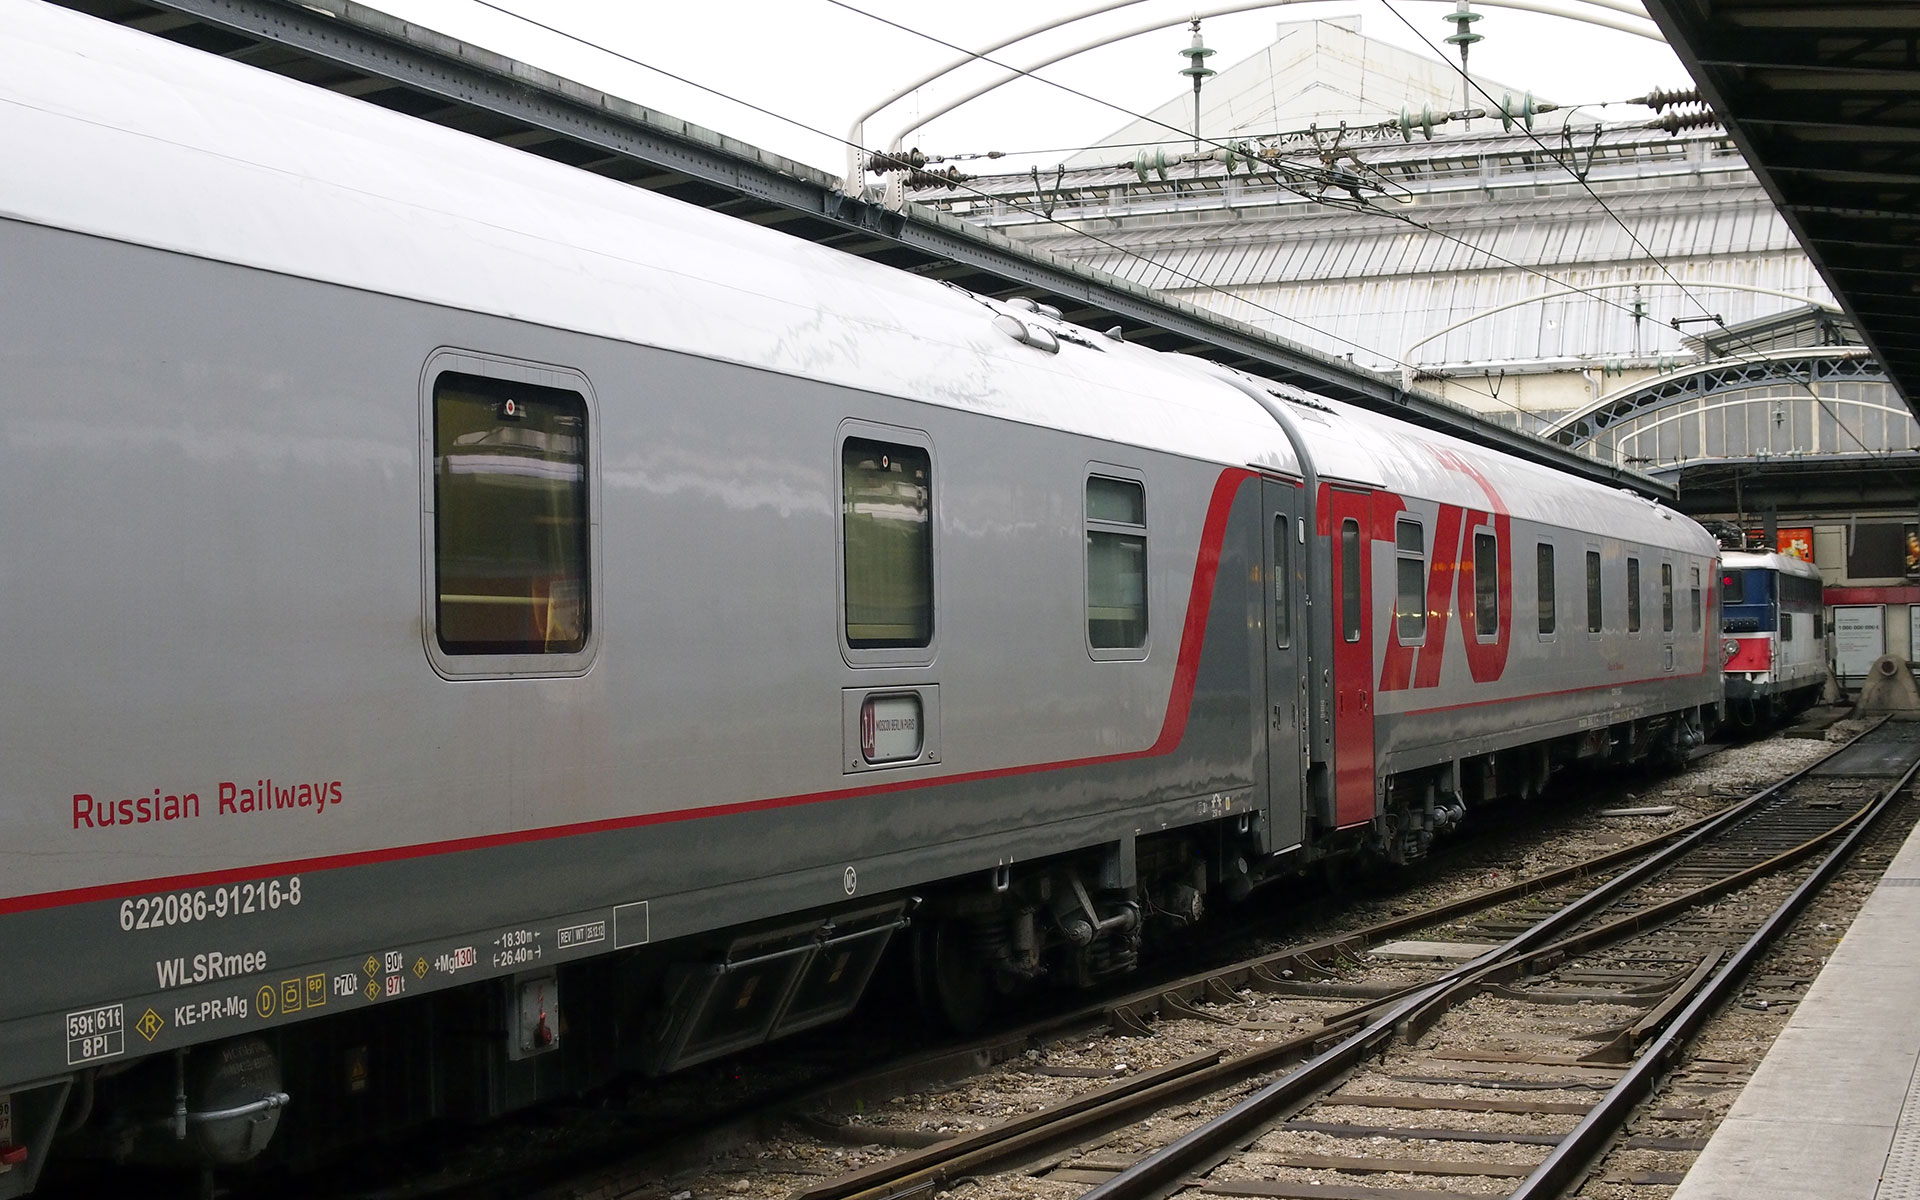 The Russian Railways’s train from Moscow to Paris, often dubbed the Transeuropean Express. Here at Paris Gare de l'Est station (photo © hidden europe).